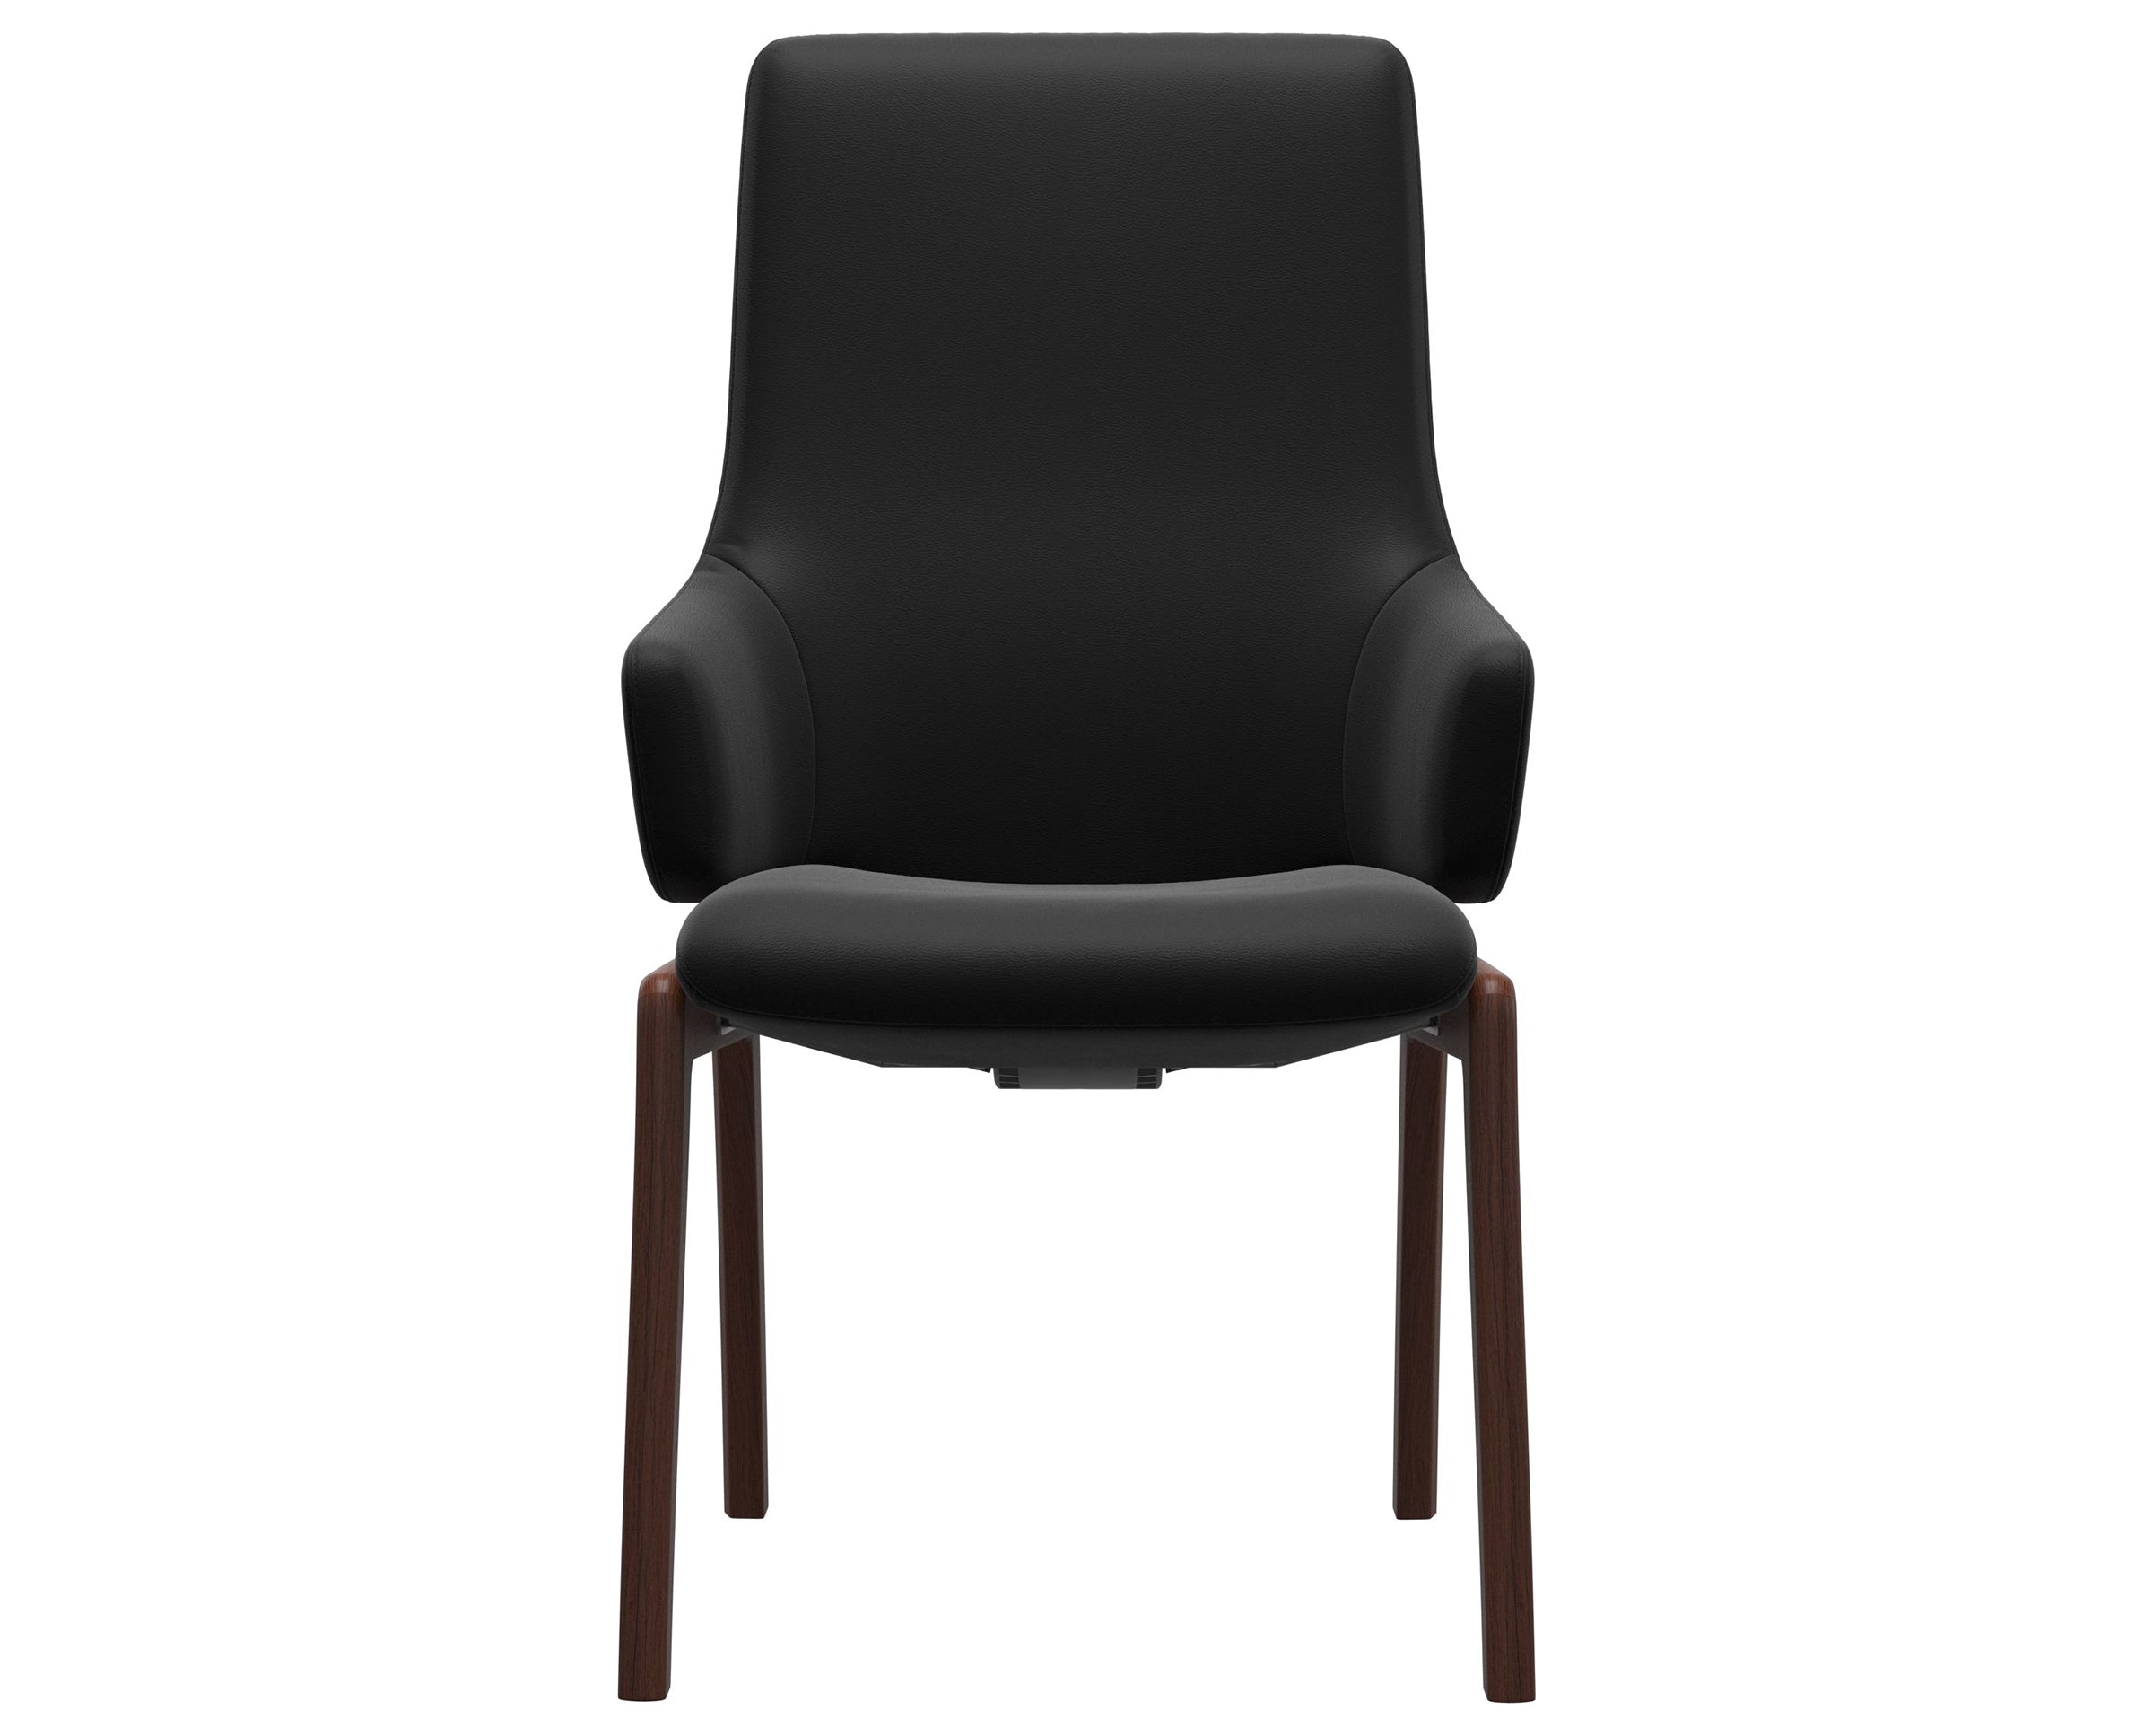 Paloma Leather Black and Walnut Base | Stressless Laurel High Back D100 Dining Chair w/Arms | Valley Ridge Furniture